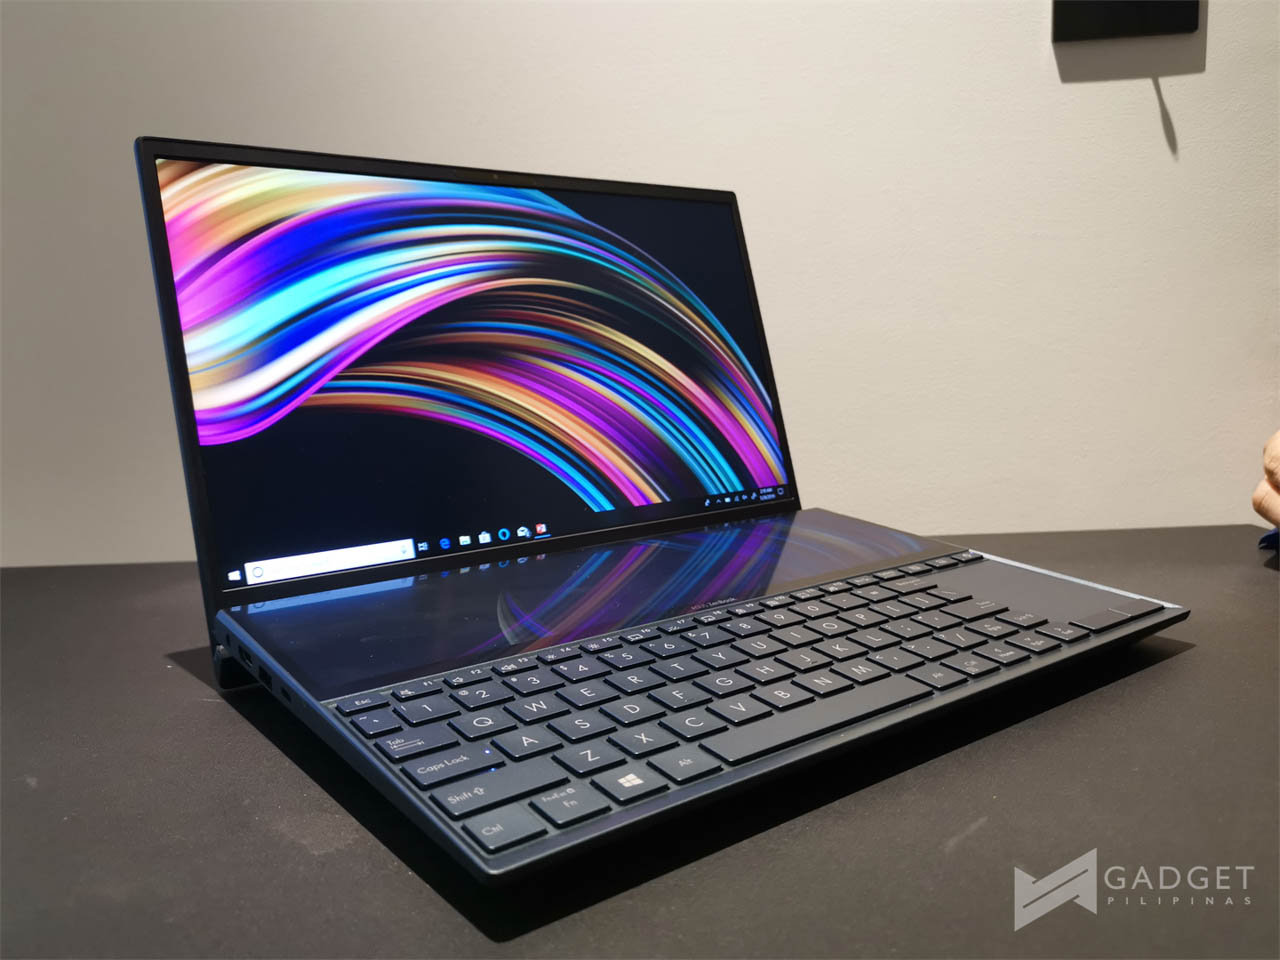 ASUS ZenBook Pro Duo announced at Computex 2019 featuring ScreenPad Plus